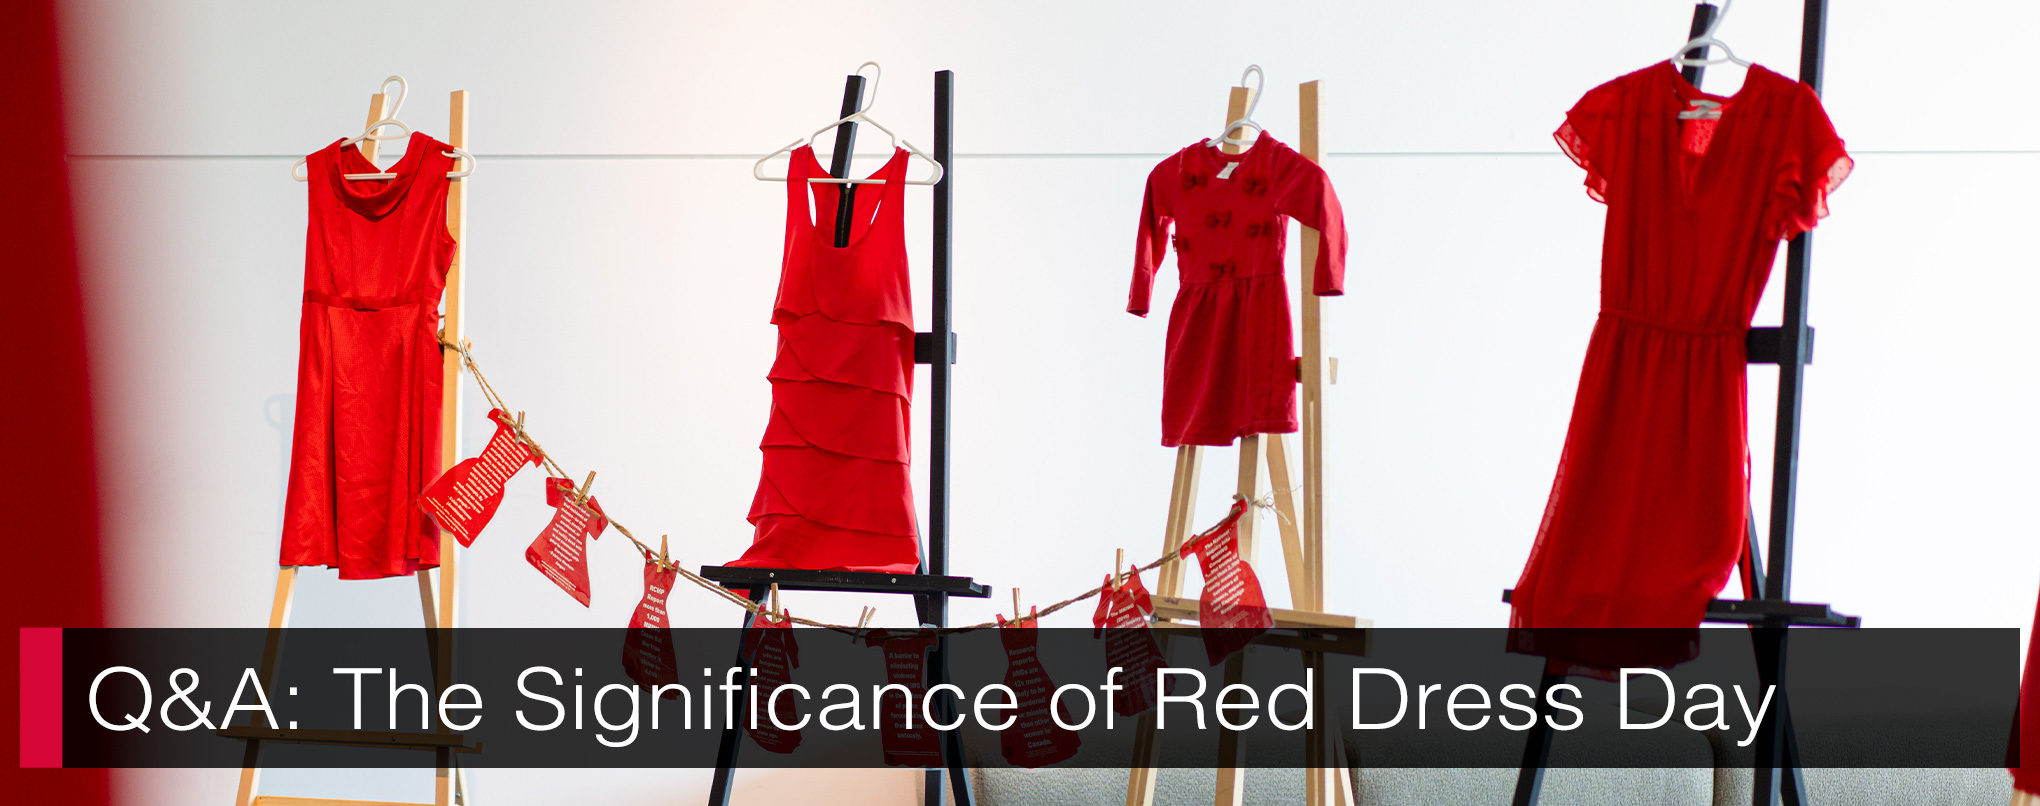 Four red dresses hung on clothes hangers displayed on easels with text, 